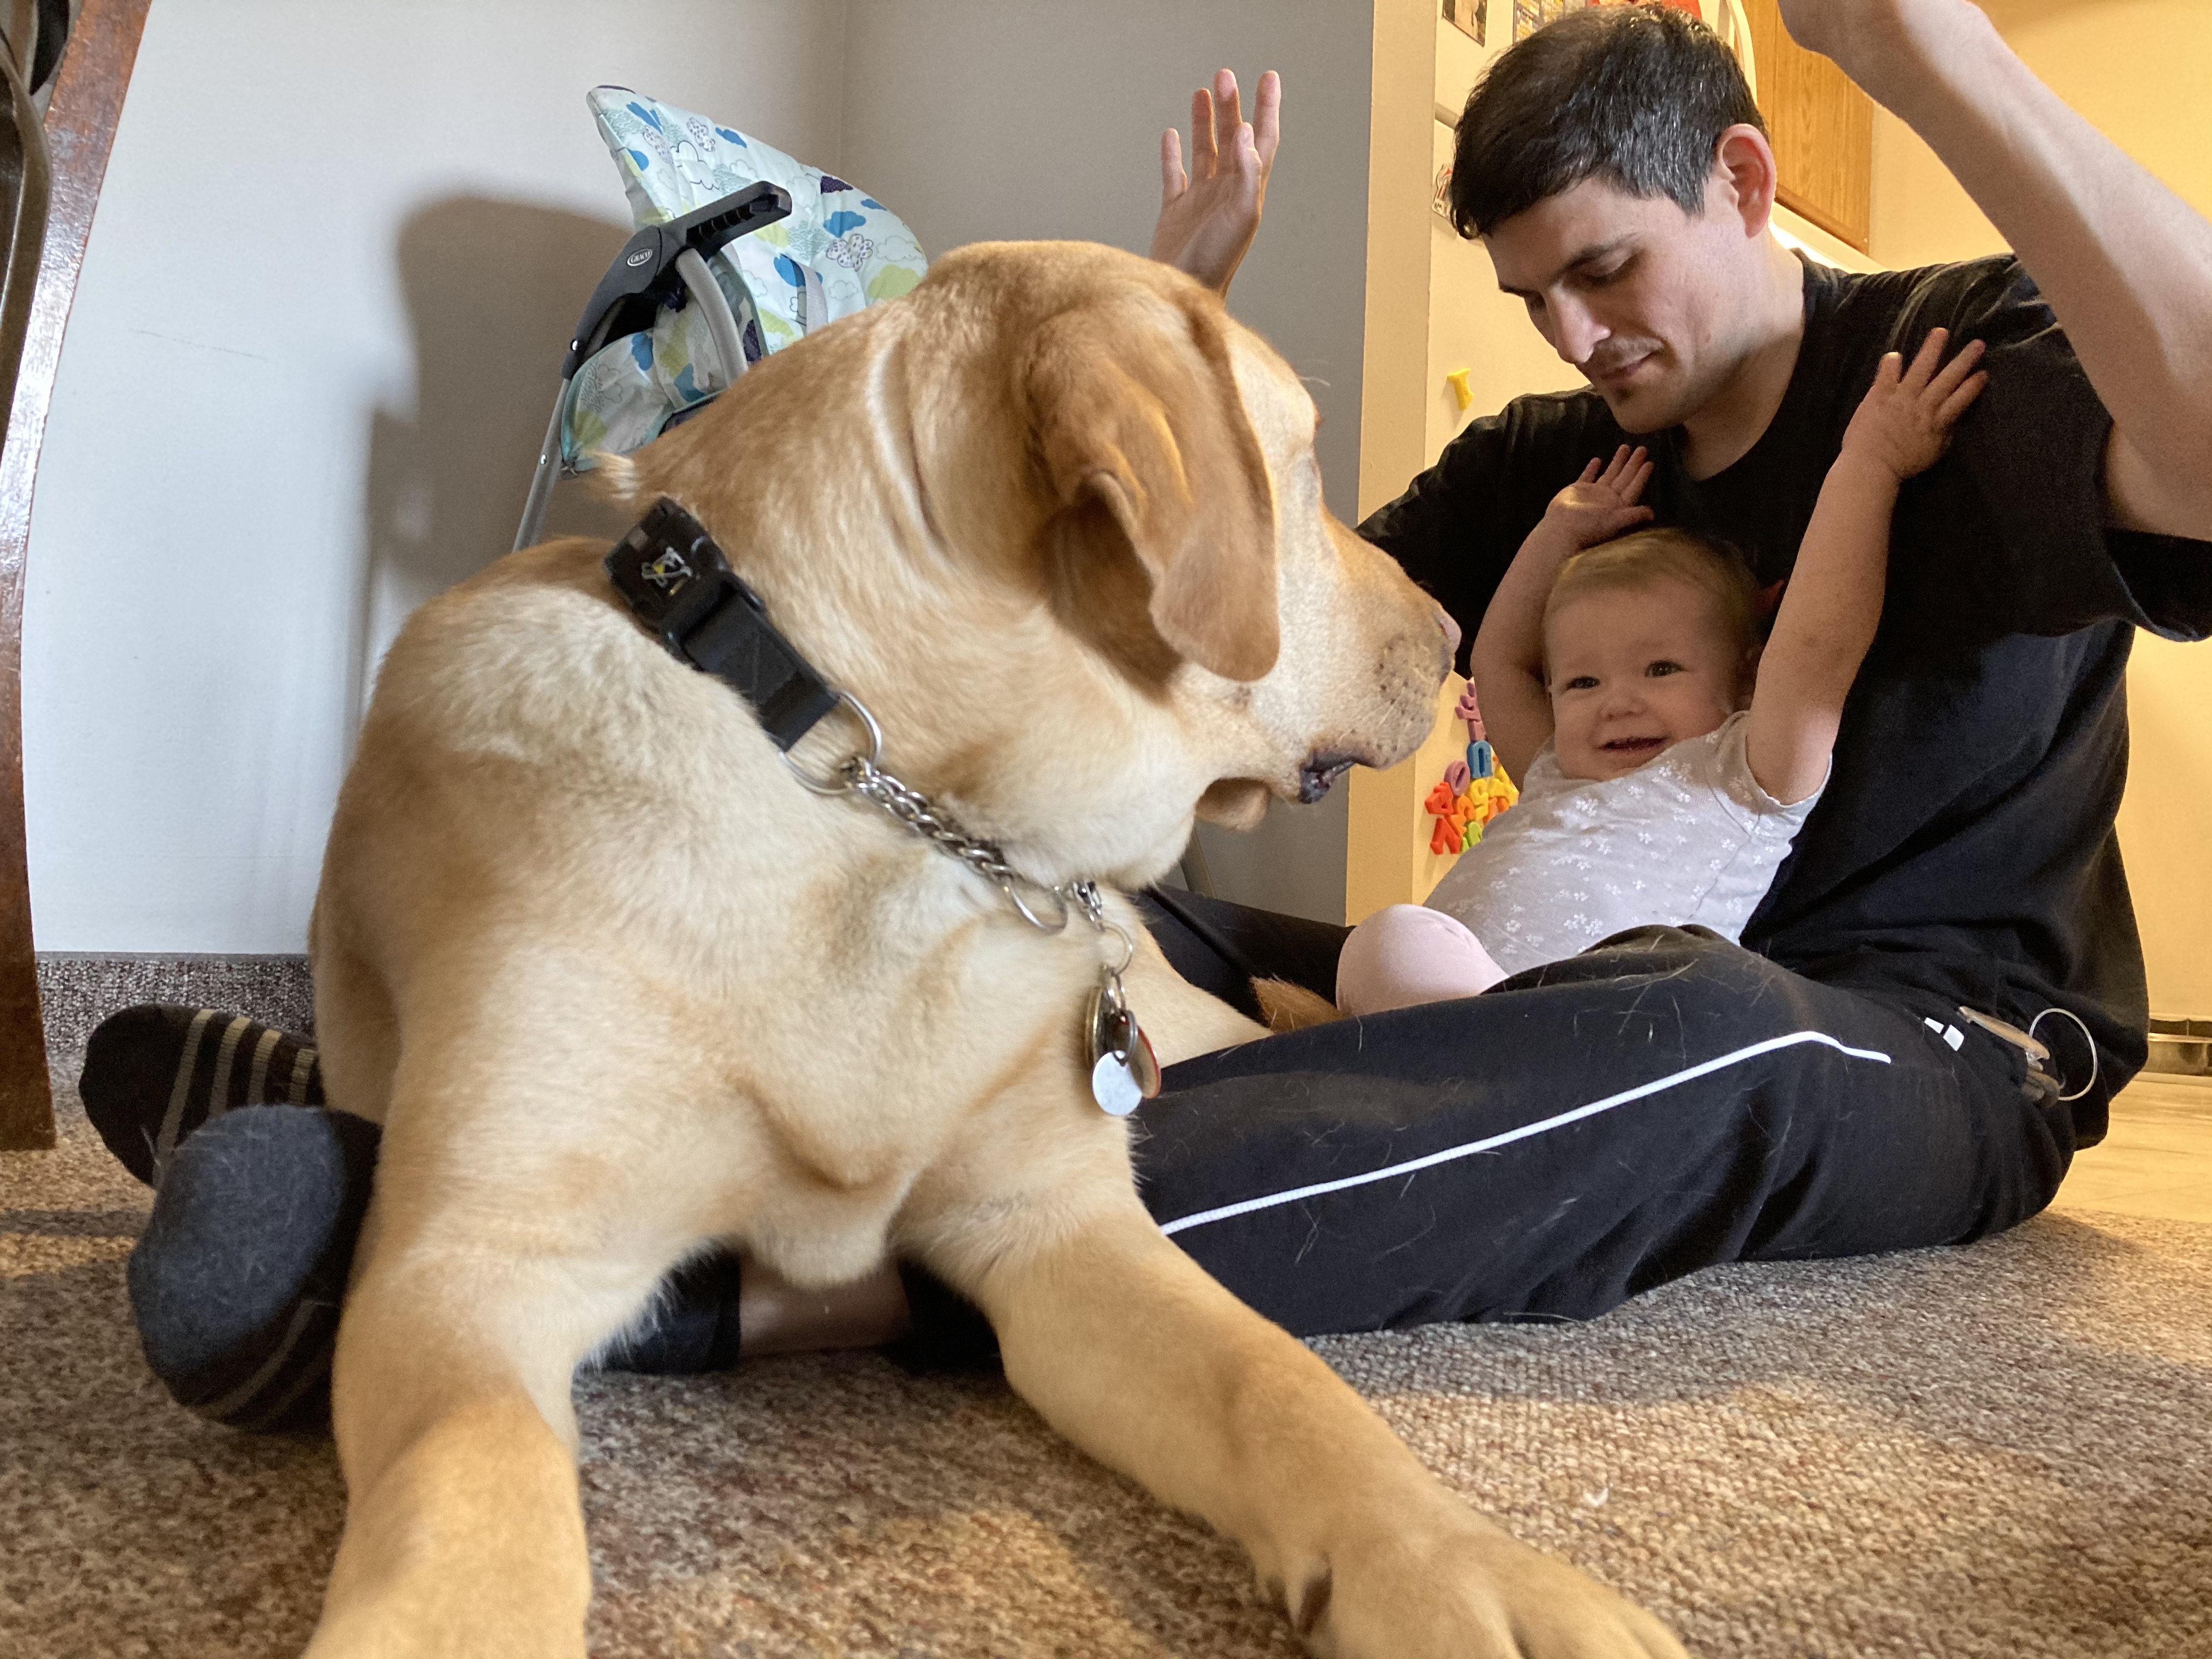 Ryan and his daughter Abigail, sitting on the floor playing with Joe, a CNIB Guide Dog.